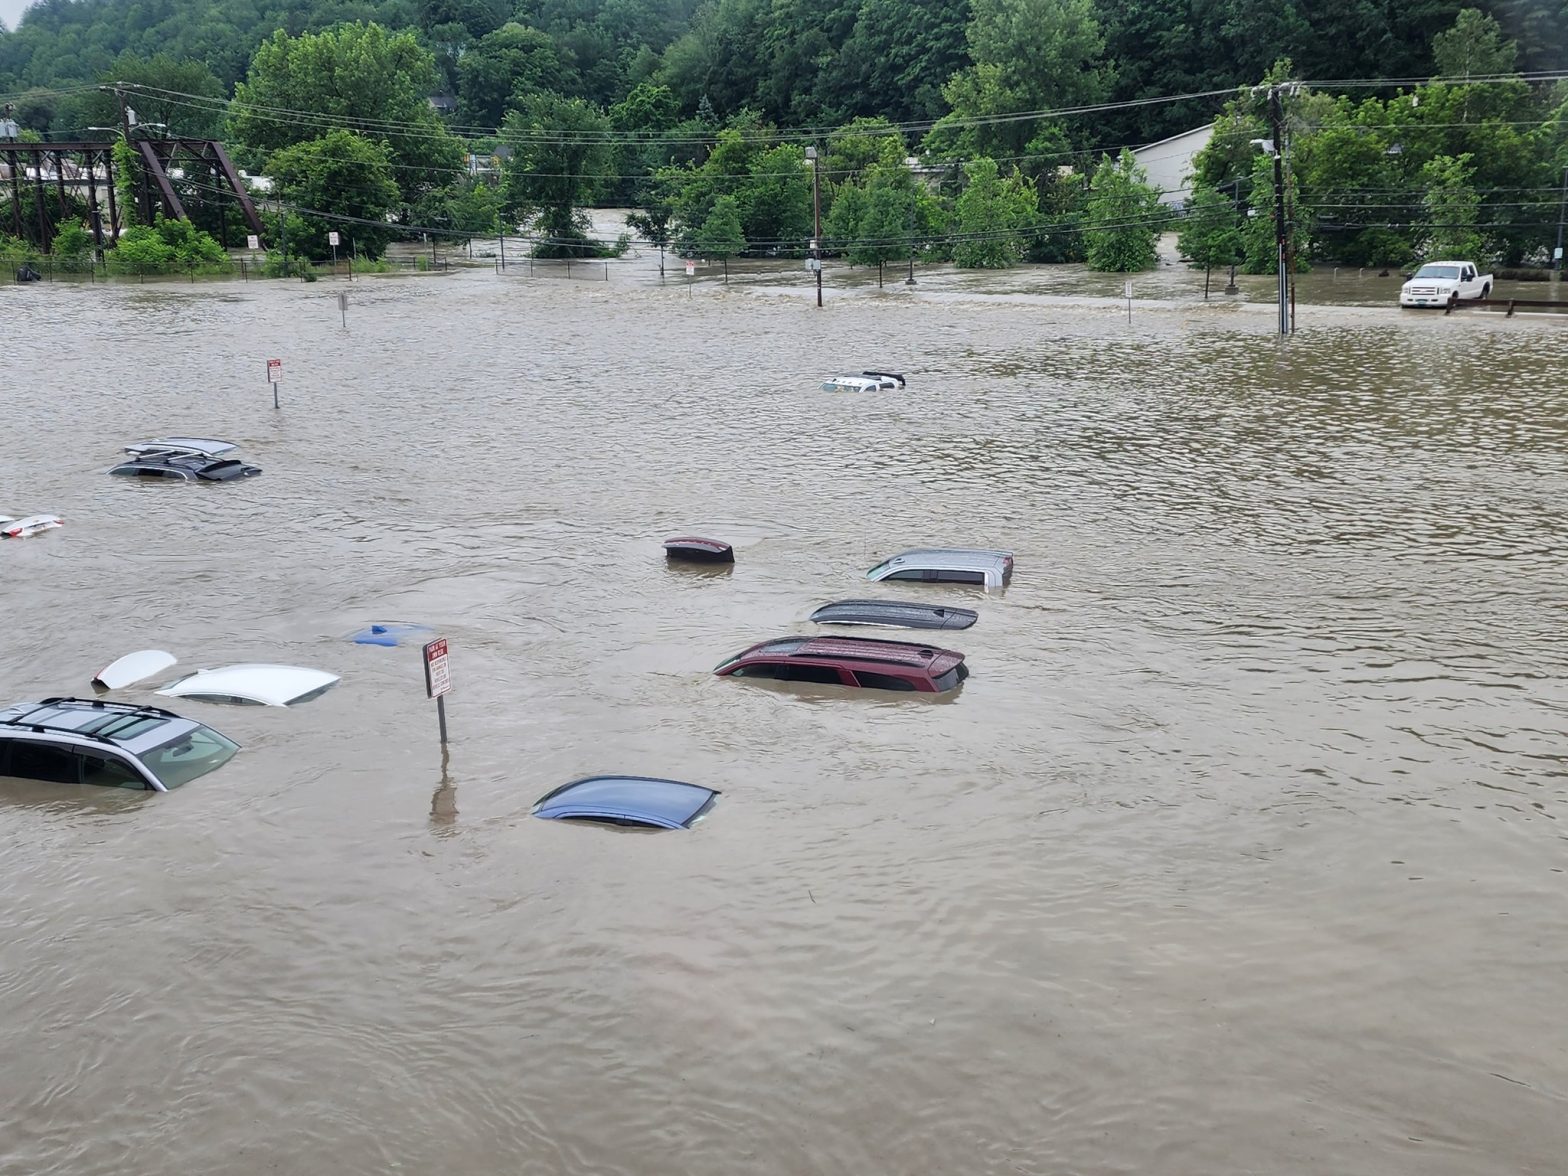 Vermont floods: Over 100 rescued as Governor calls condition “historic and catastrophic”